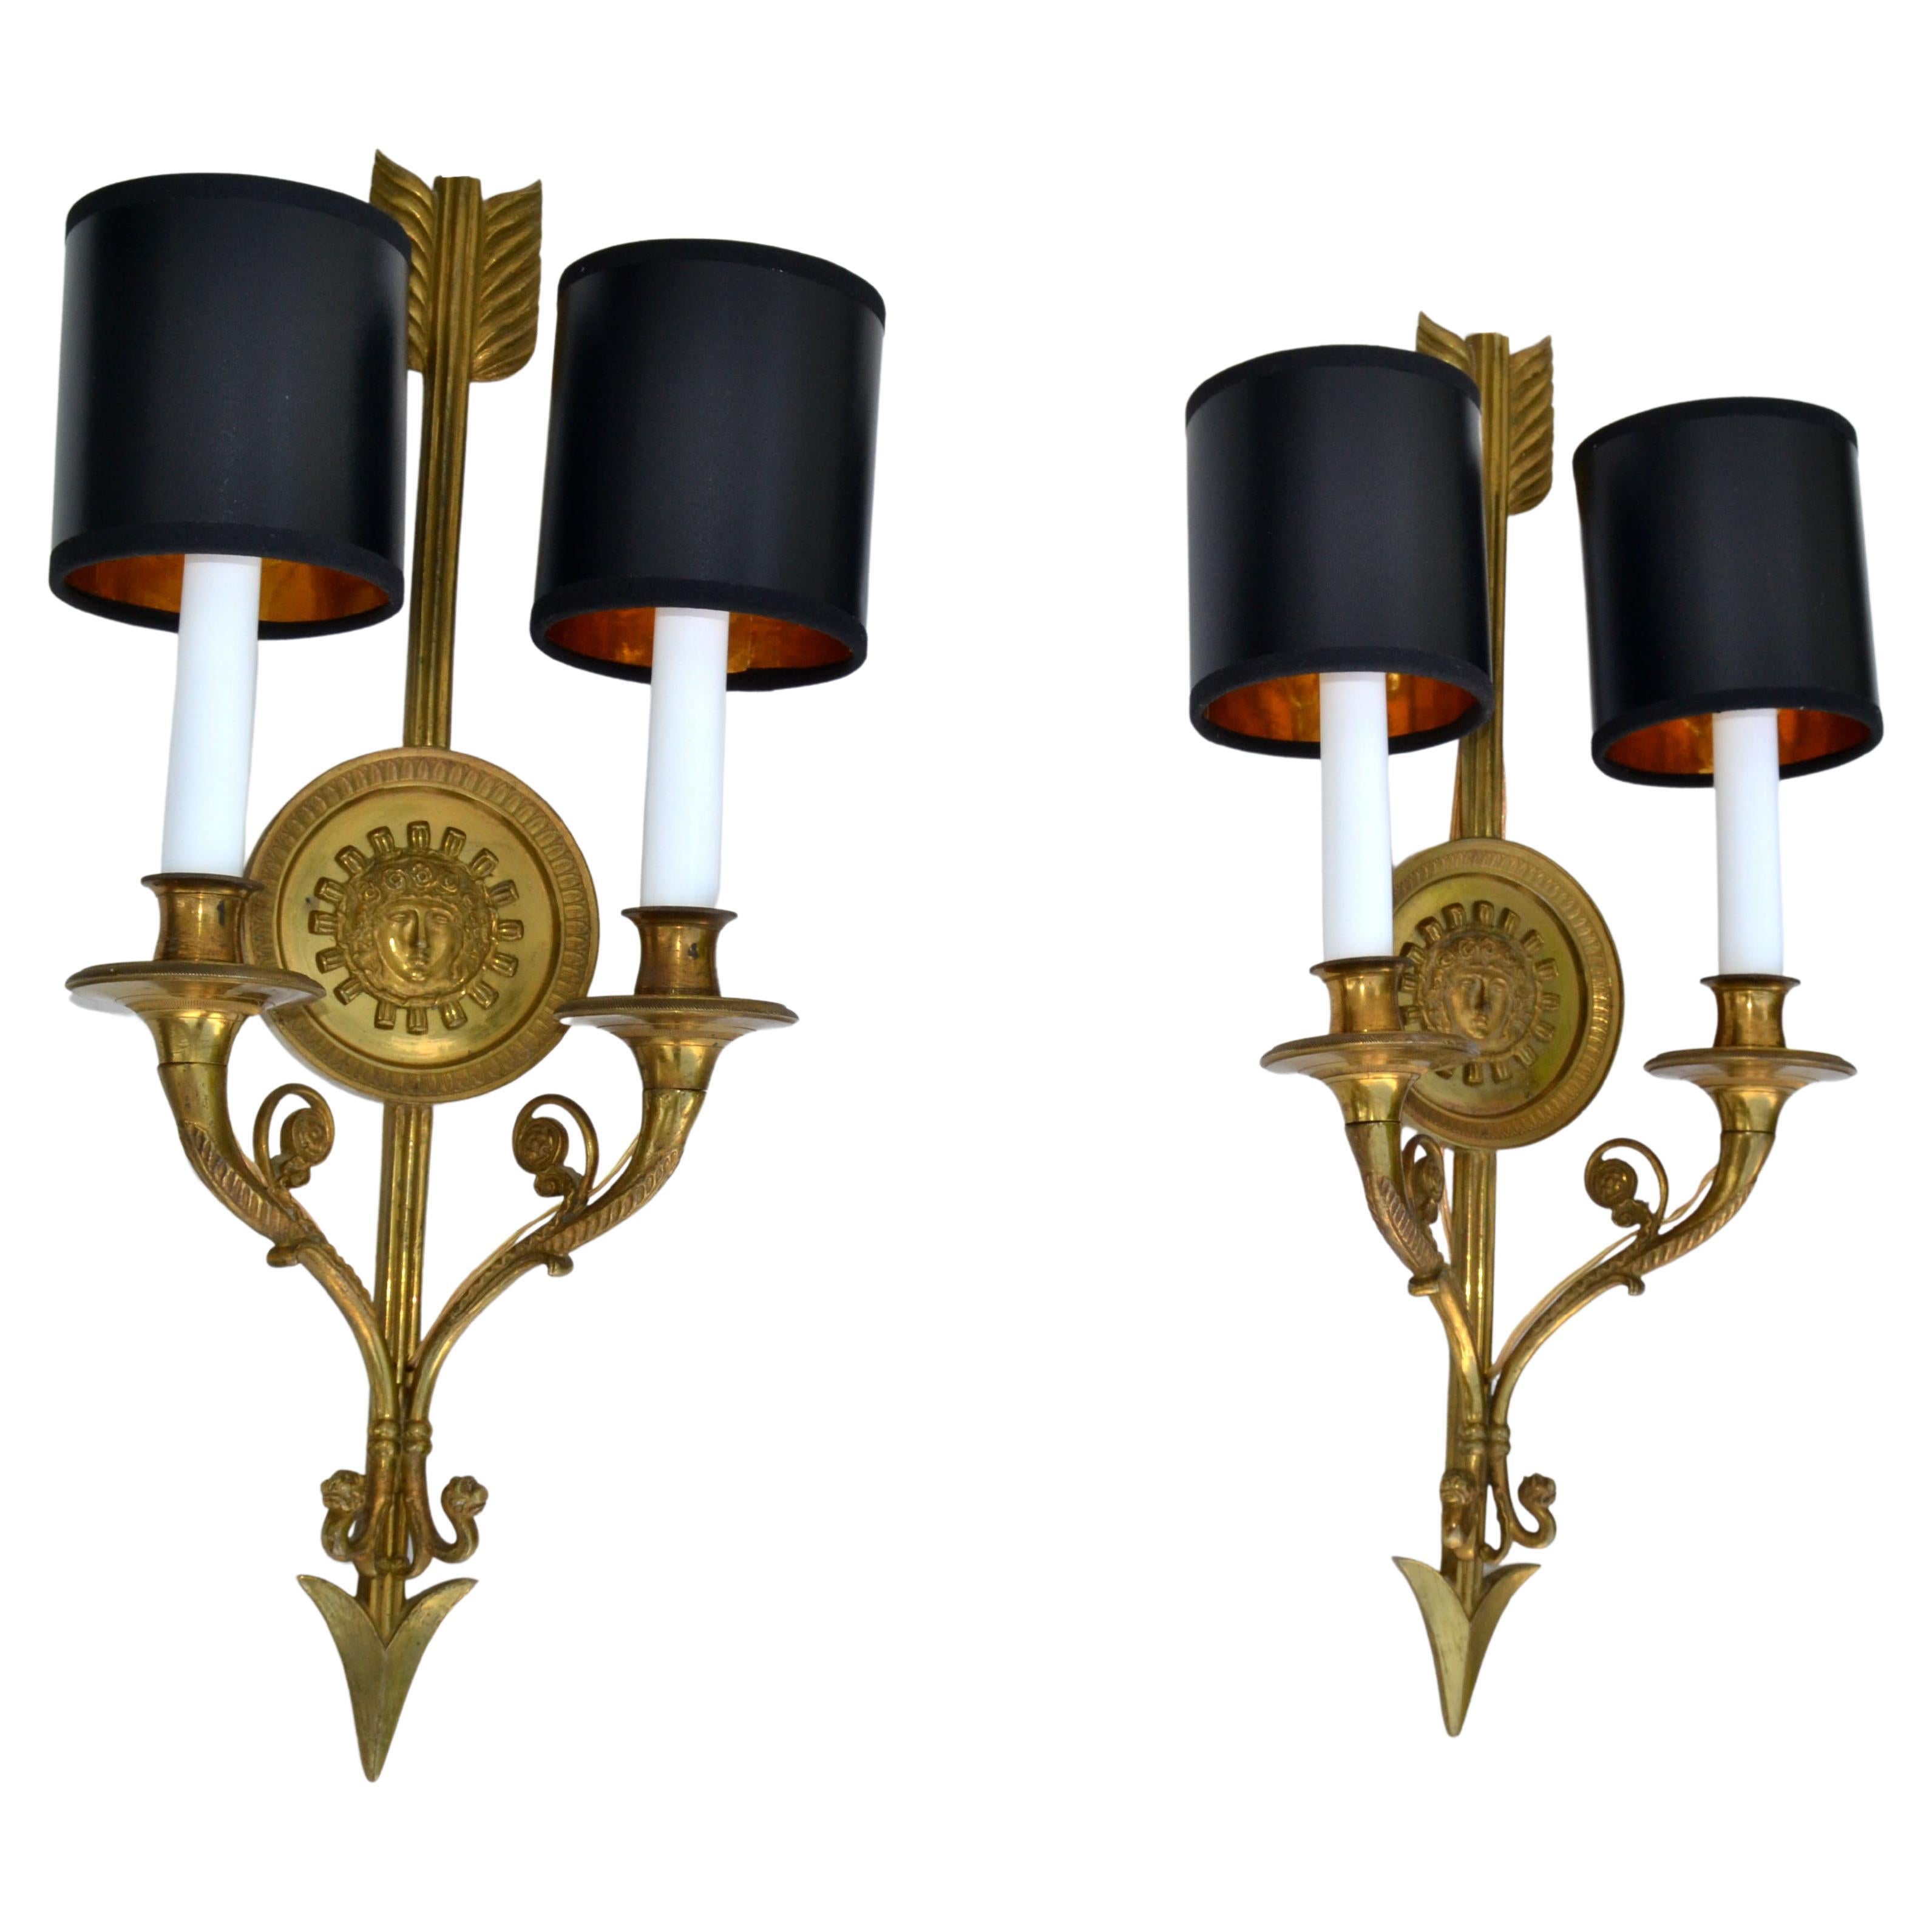 Pair of Andre Arbus Bronze Arrow Sconces 2 Lights, Wall Lamp French Neoclassical